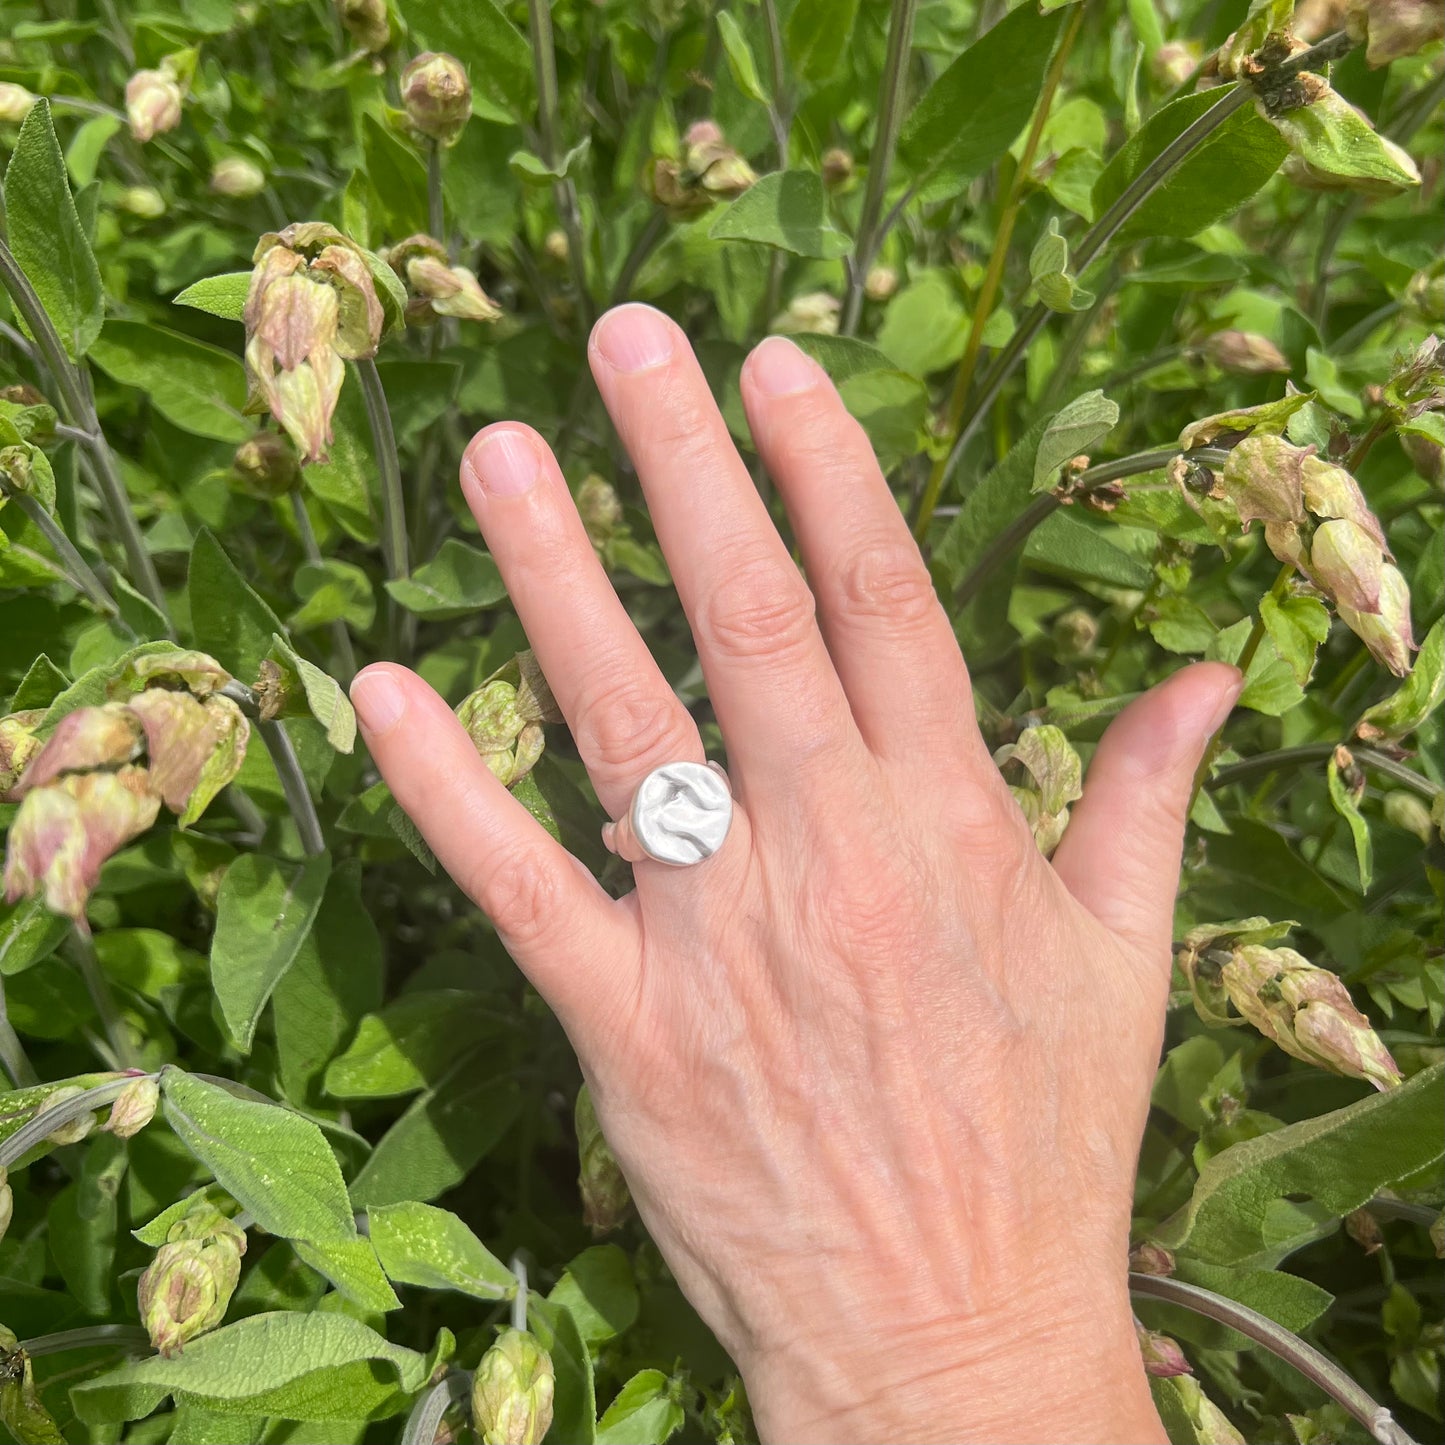 A matt sterling silver splash ring on a hand with a shrub in the background.